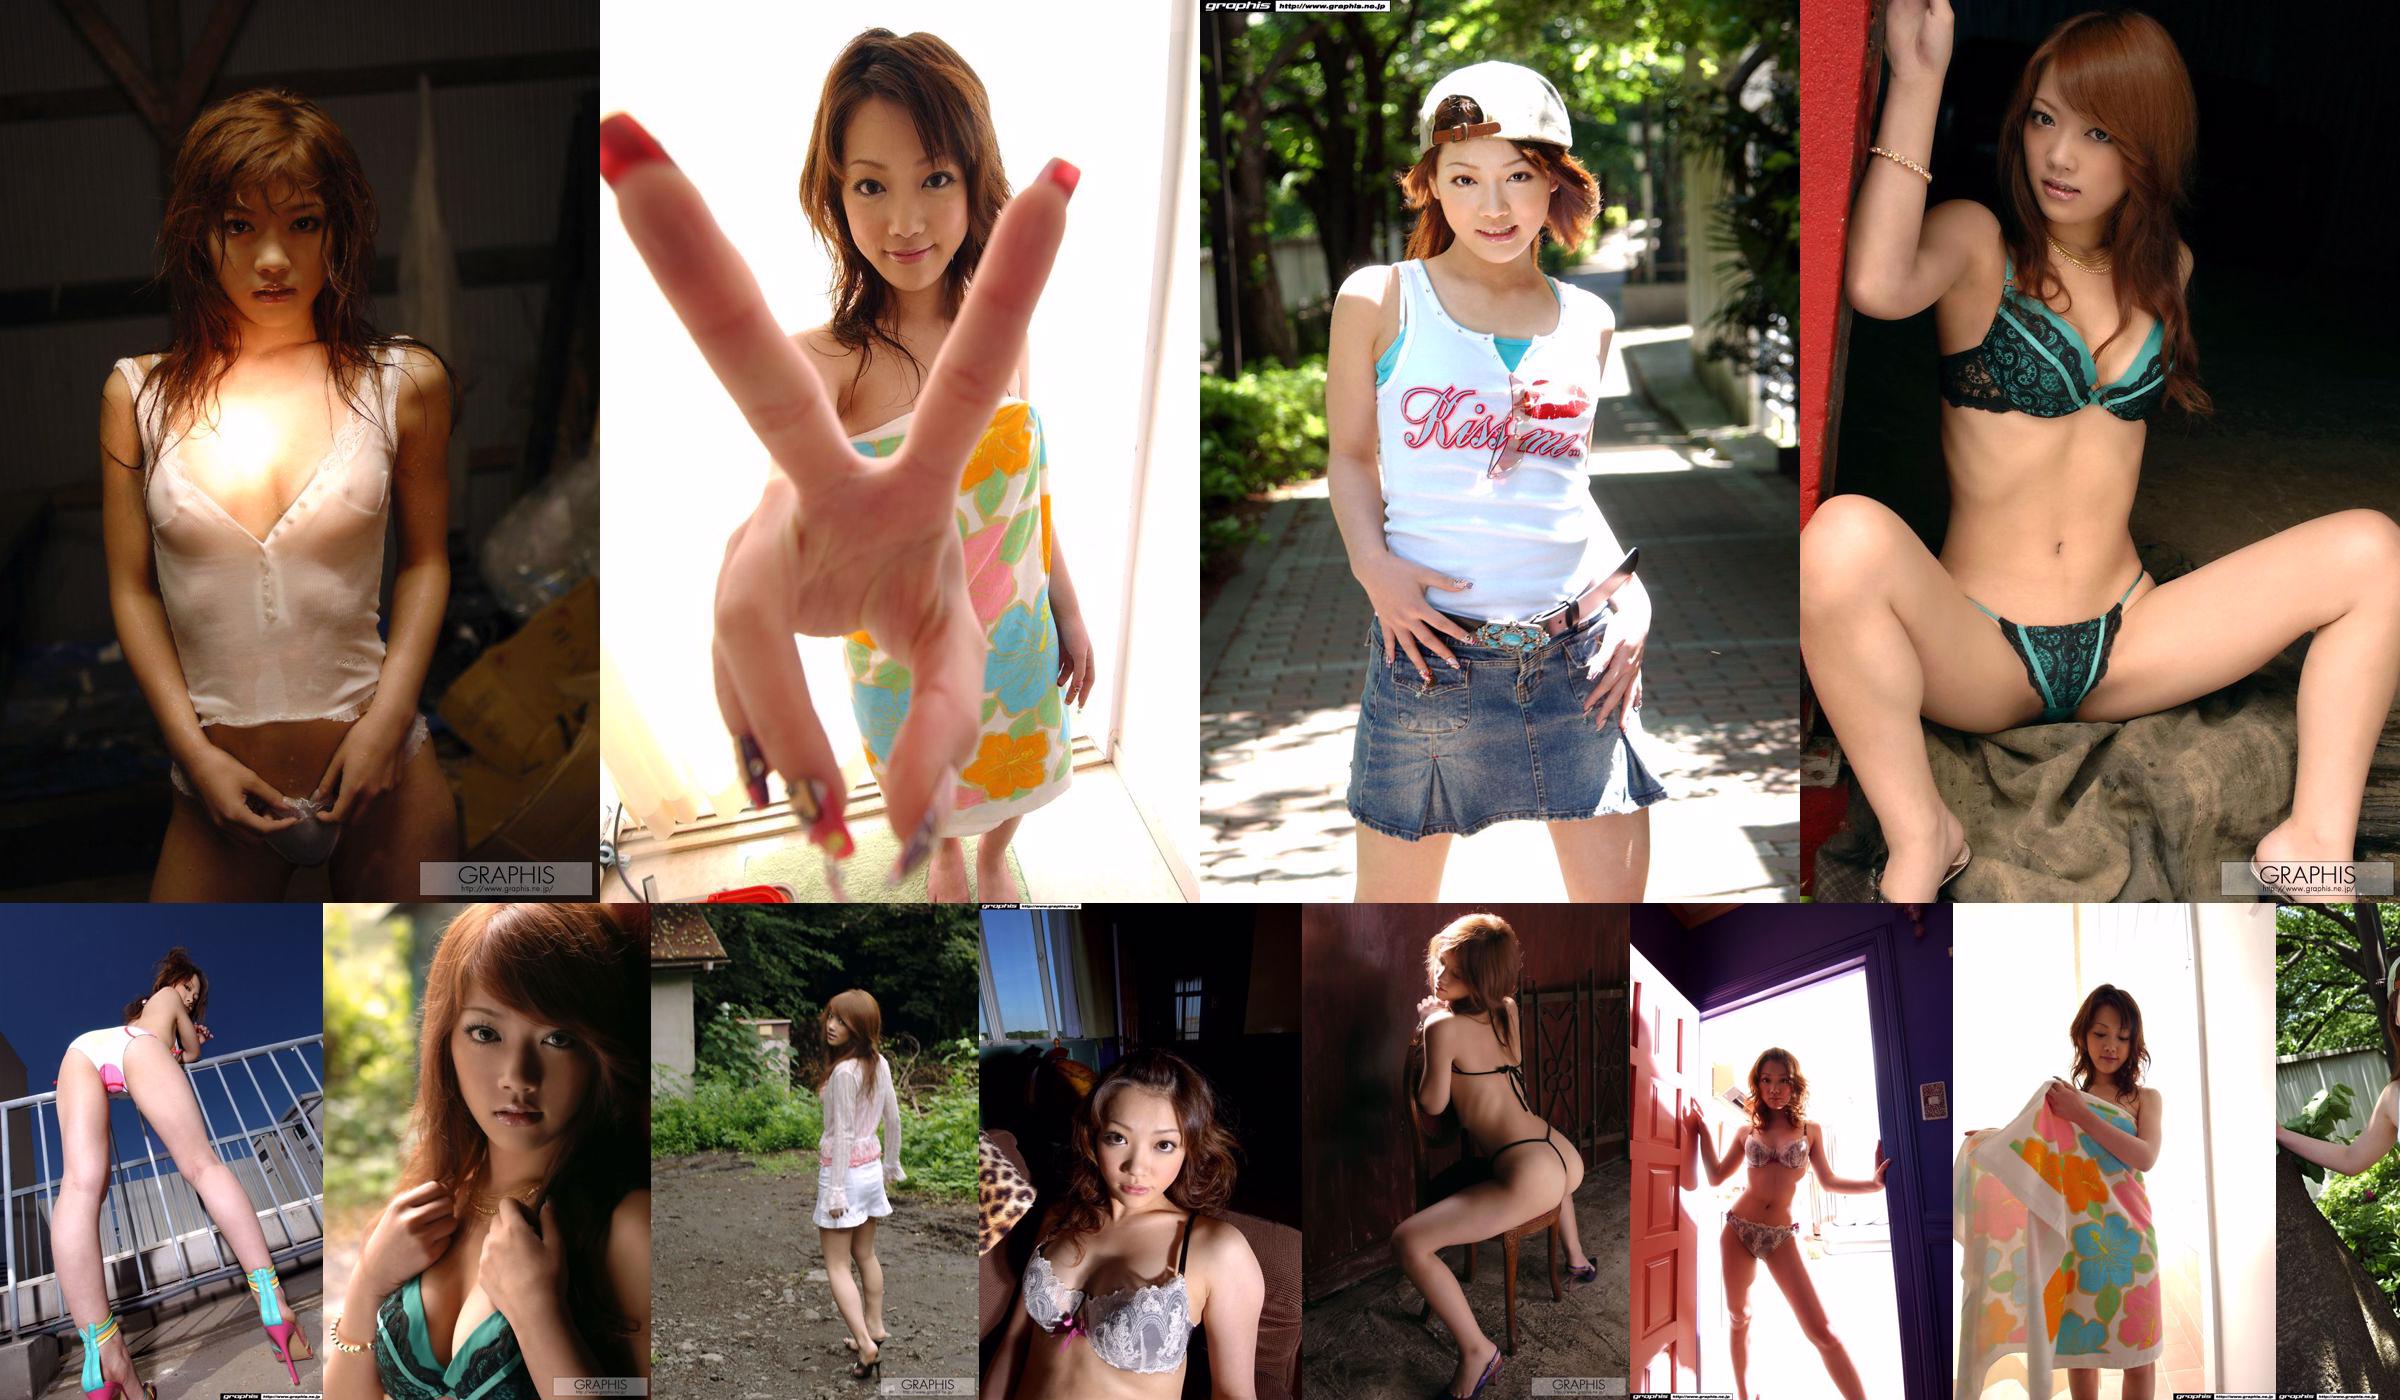 Mai Kitamura "Complete Education" [Graphis] Gals No.9abbce Page 1